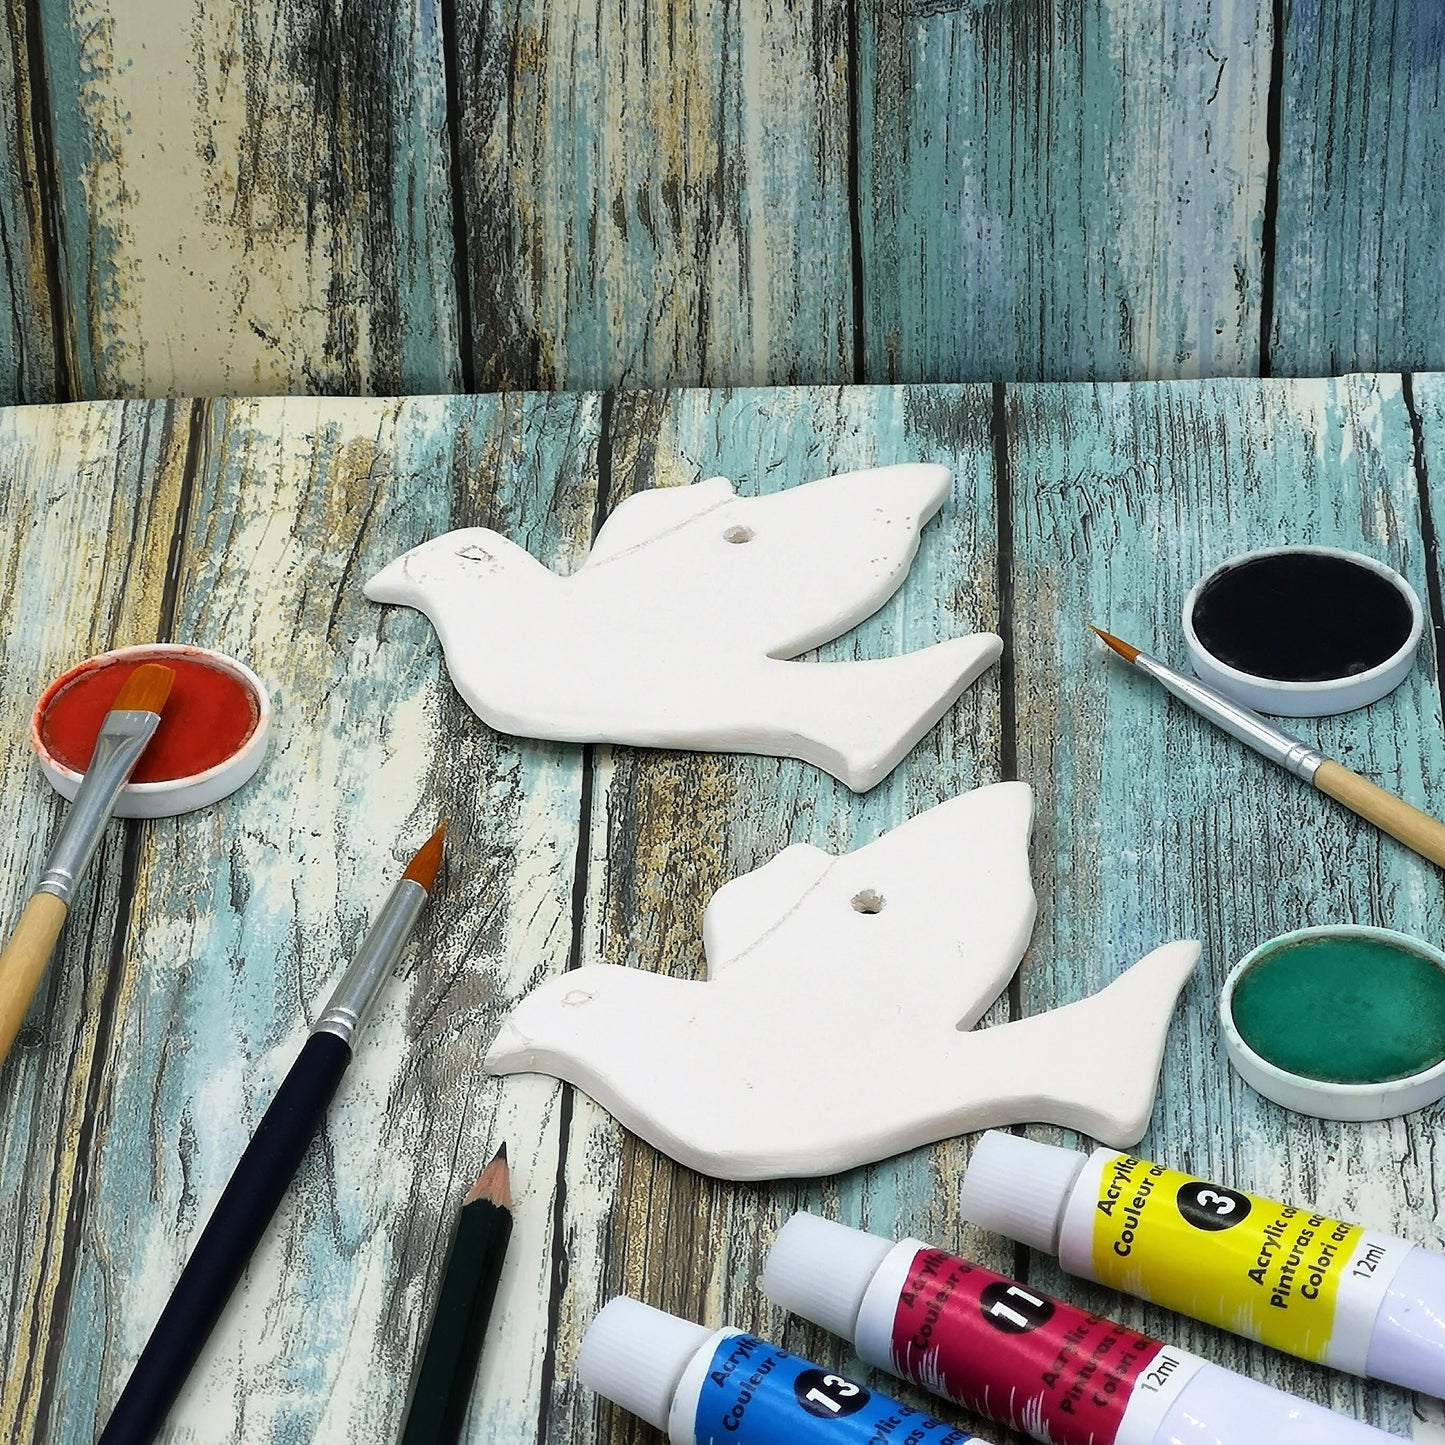 White Ceramic Dove Ready To Paint, Unpainted Ceramic Bisque Bird Wall Hanging, Custom Mourning Dove For Memorial, Christmas Ornaments - Ceramica Ana Rafael